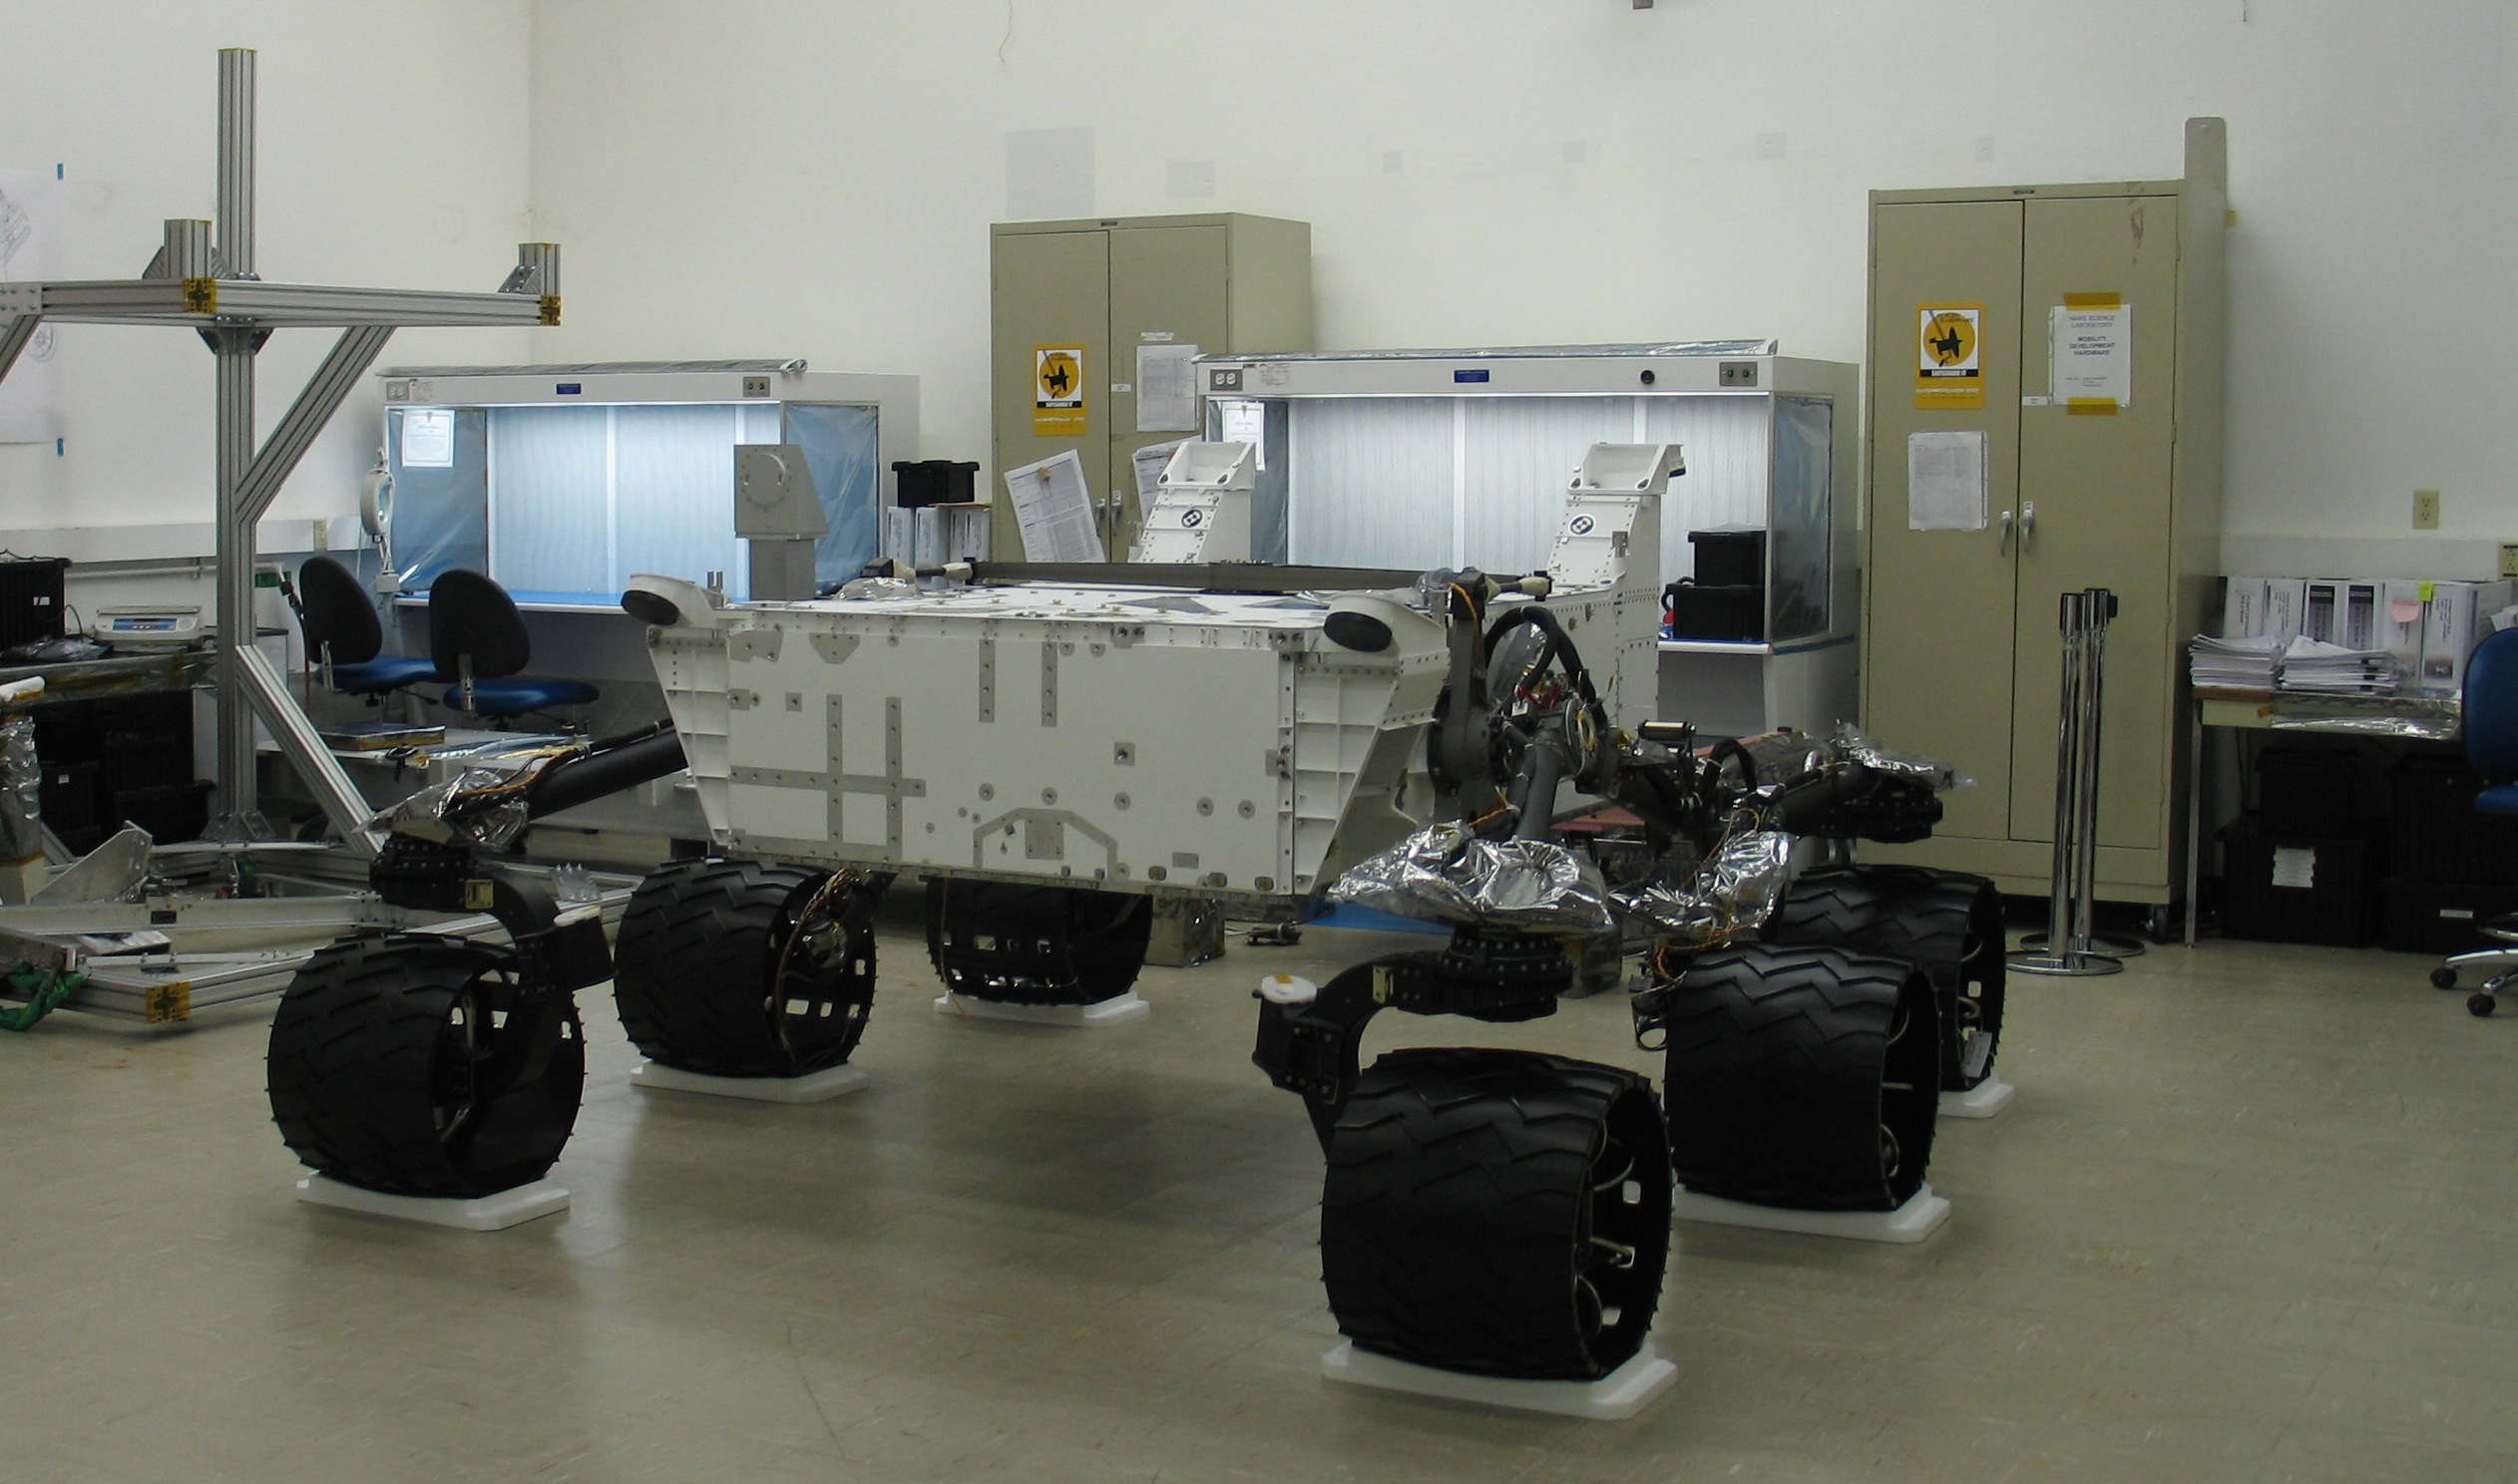 This image shows the body of the Mars Science Laboratory rover inside a clean room, supported by its six huge wheels and suspension system. Specially fitted platforms underneath the wheels hold the rover in place and prevent it from moving.